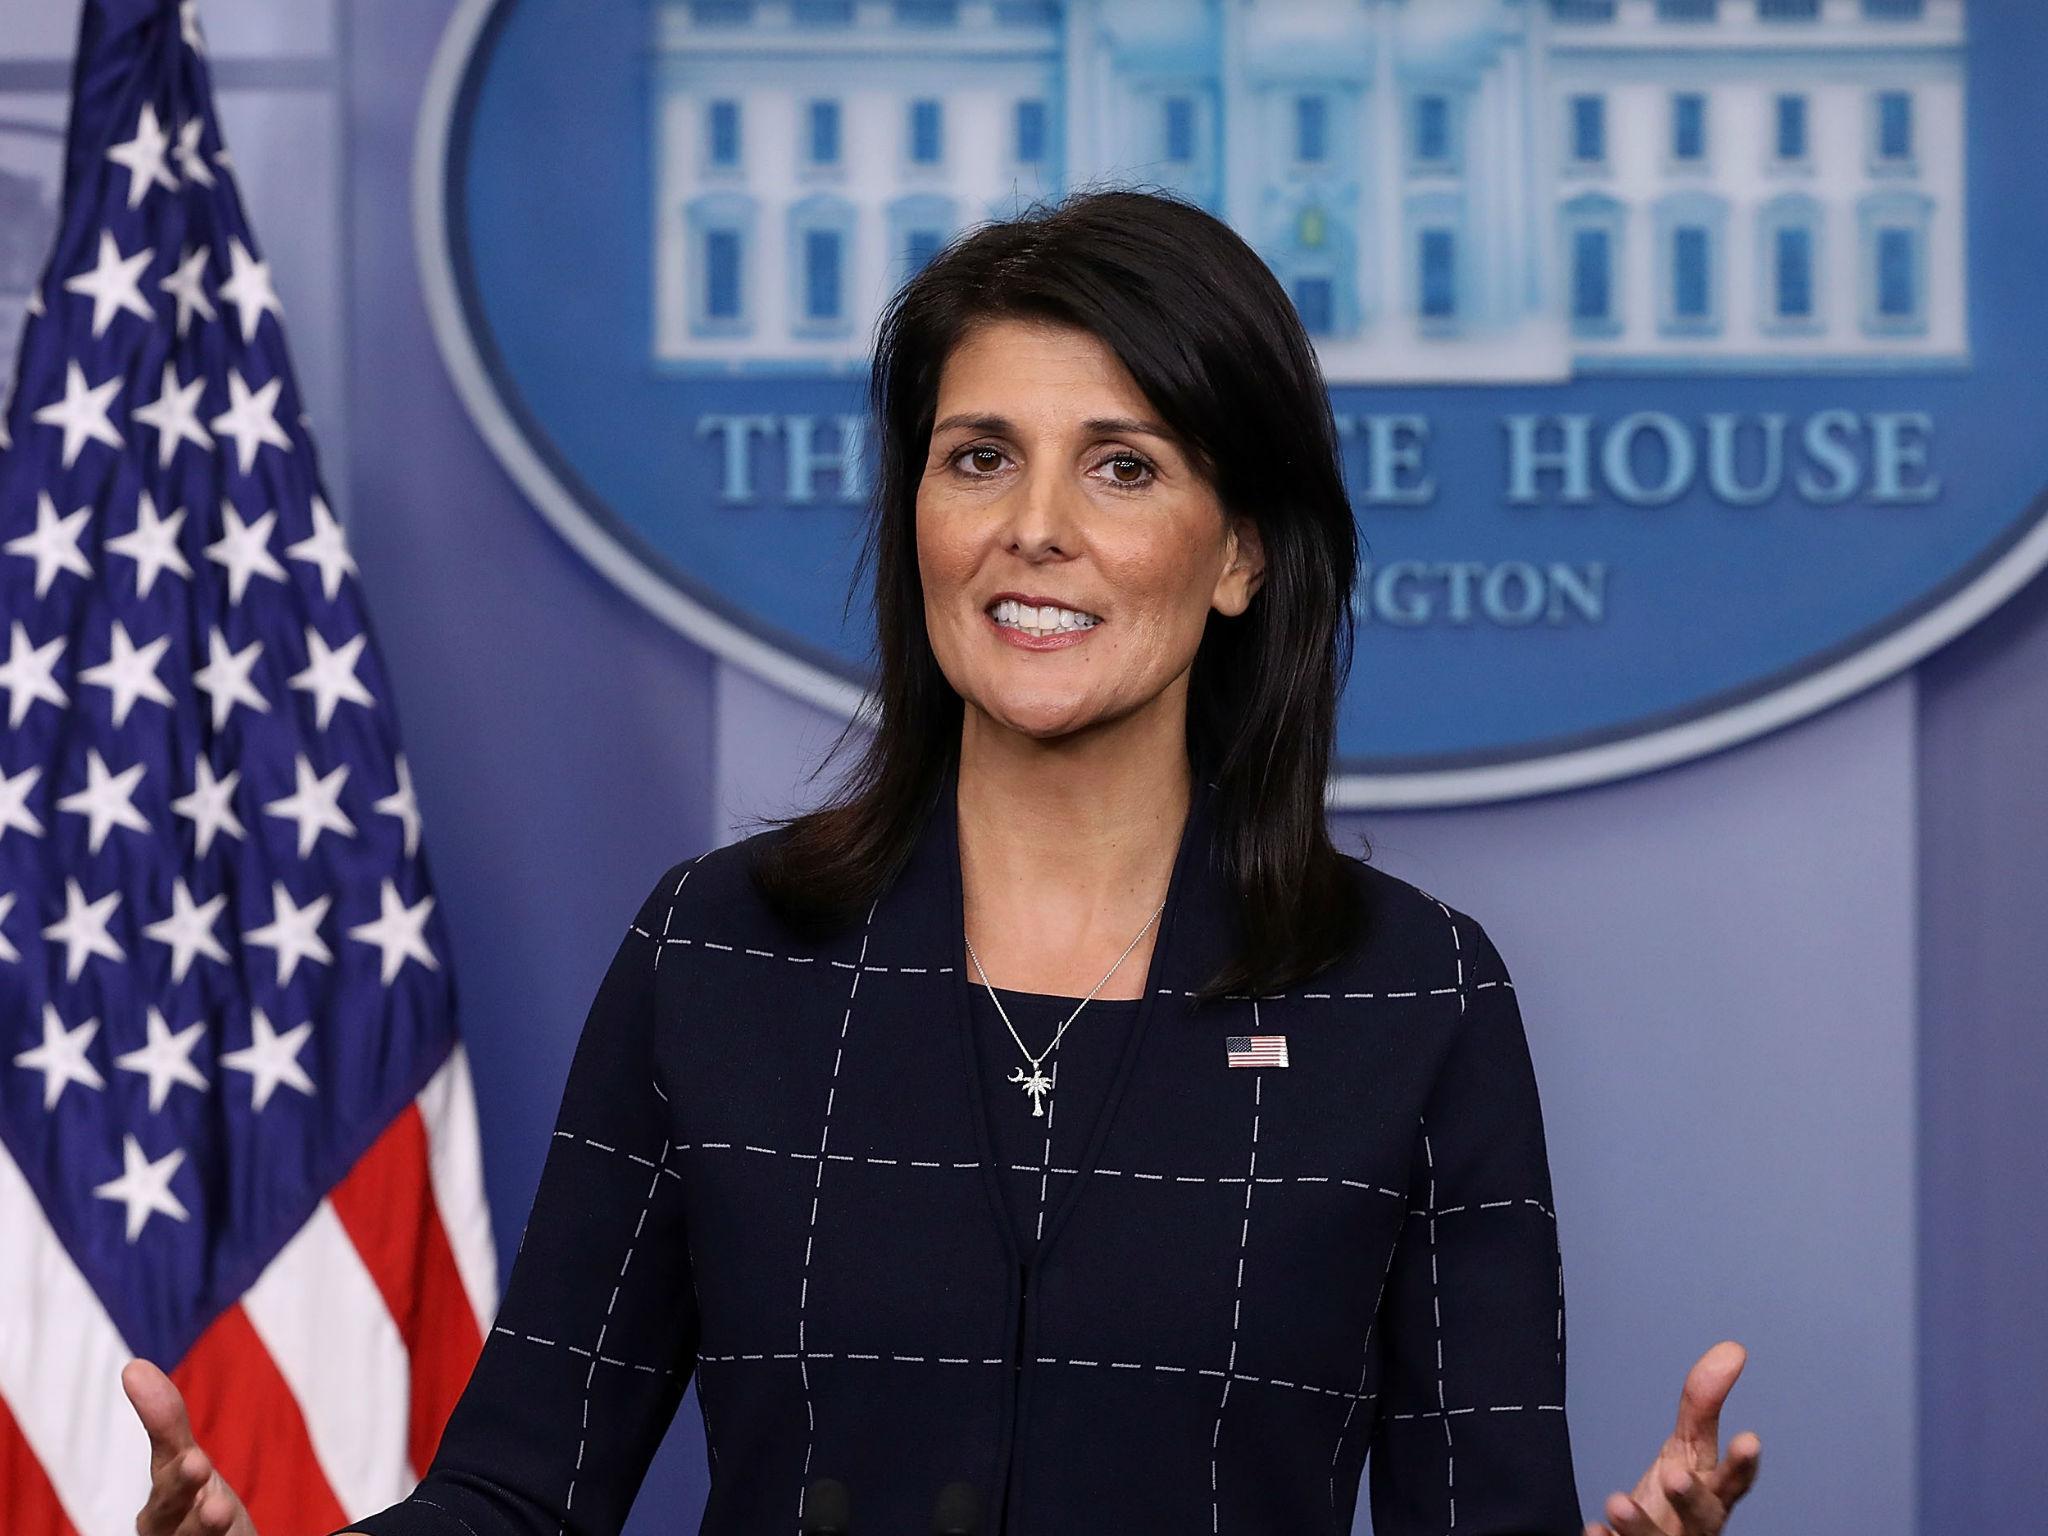 US ambassador to the UN Nikki Haley warns the Trump administration may pull out from the UN Human Rights Council